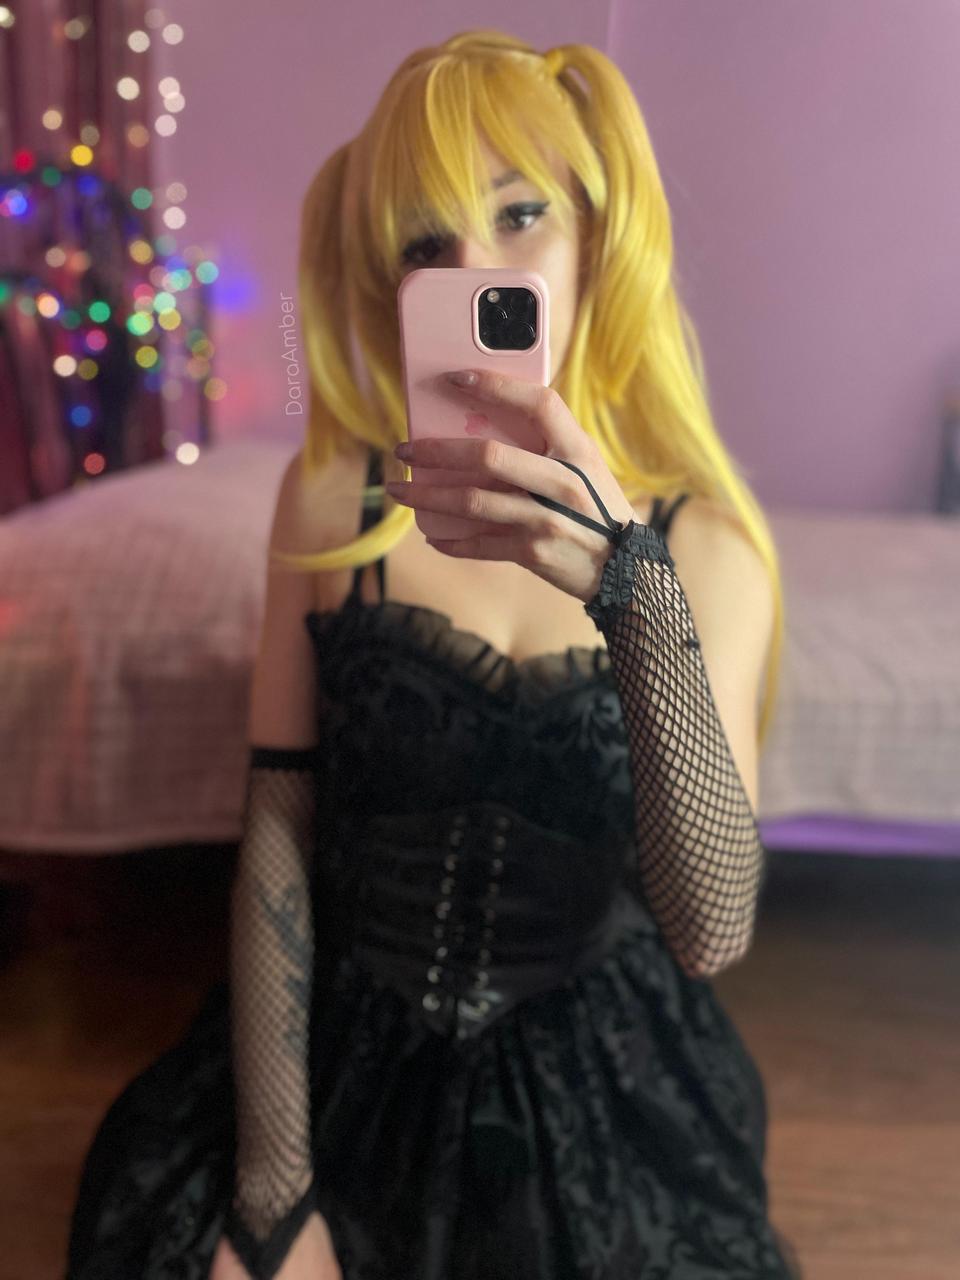 Amane Misa From Death Note By Dara Ambe